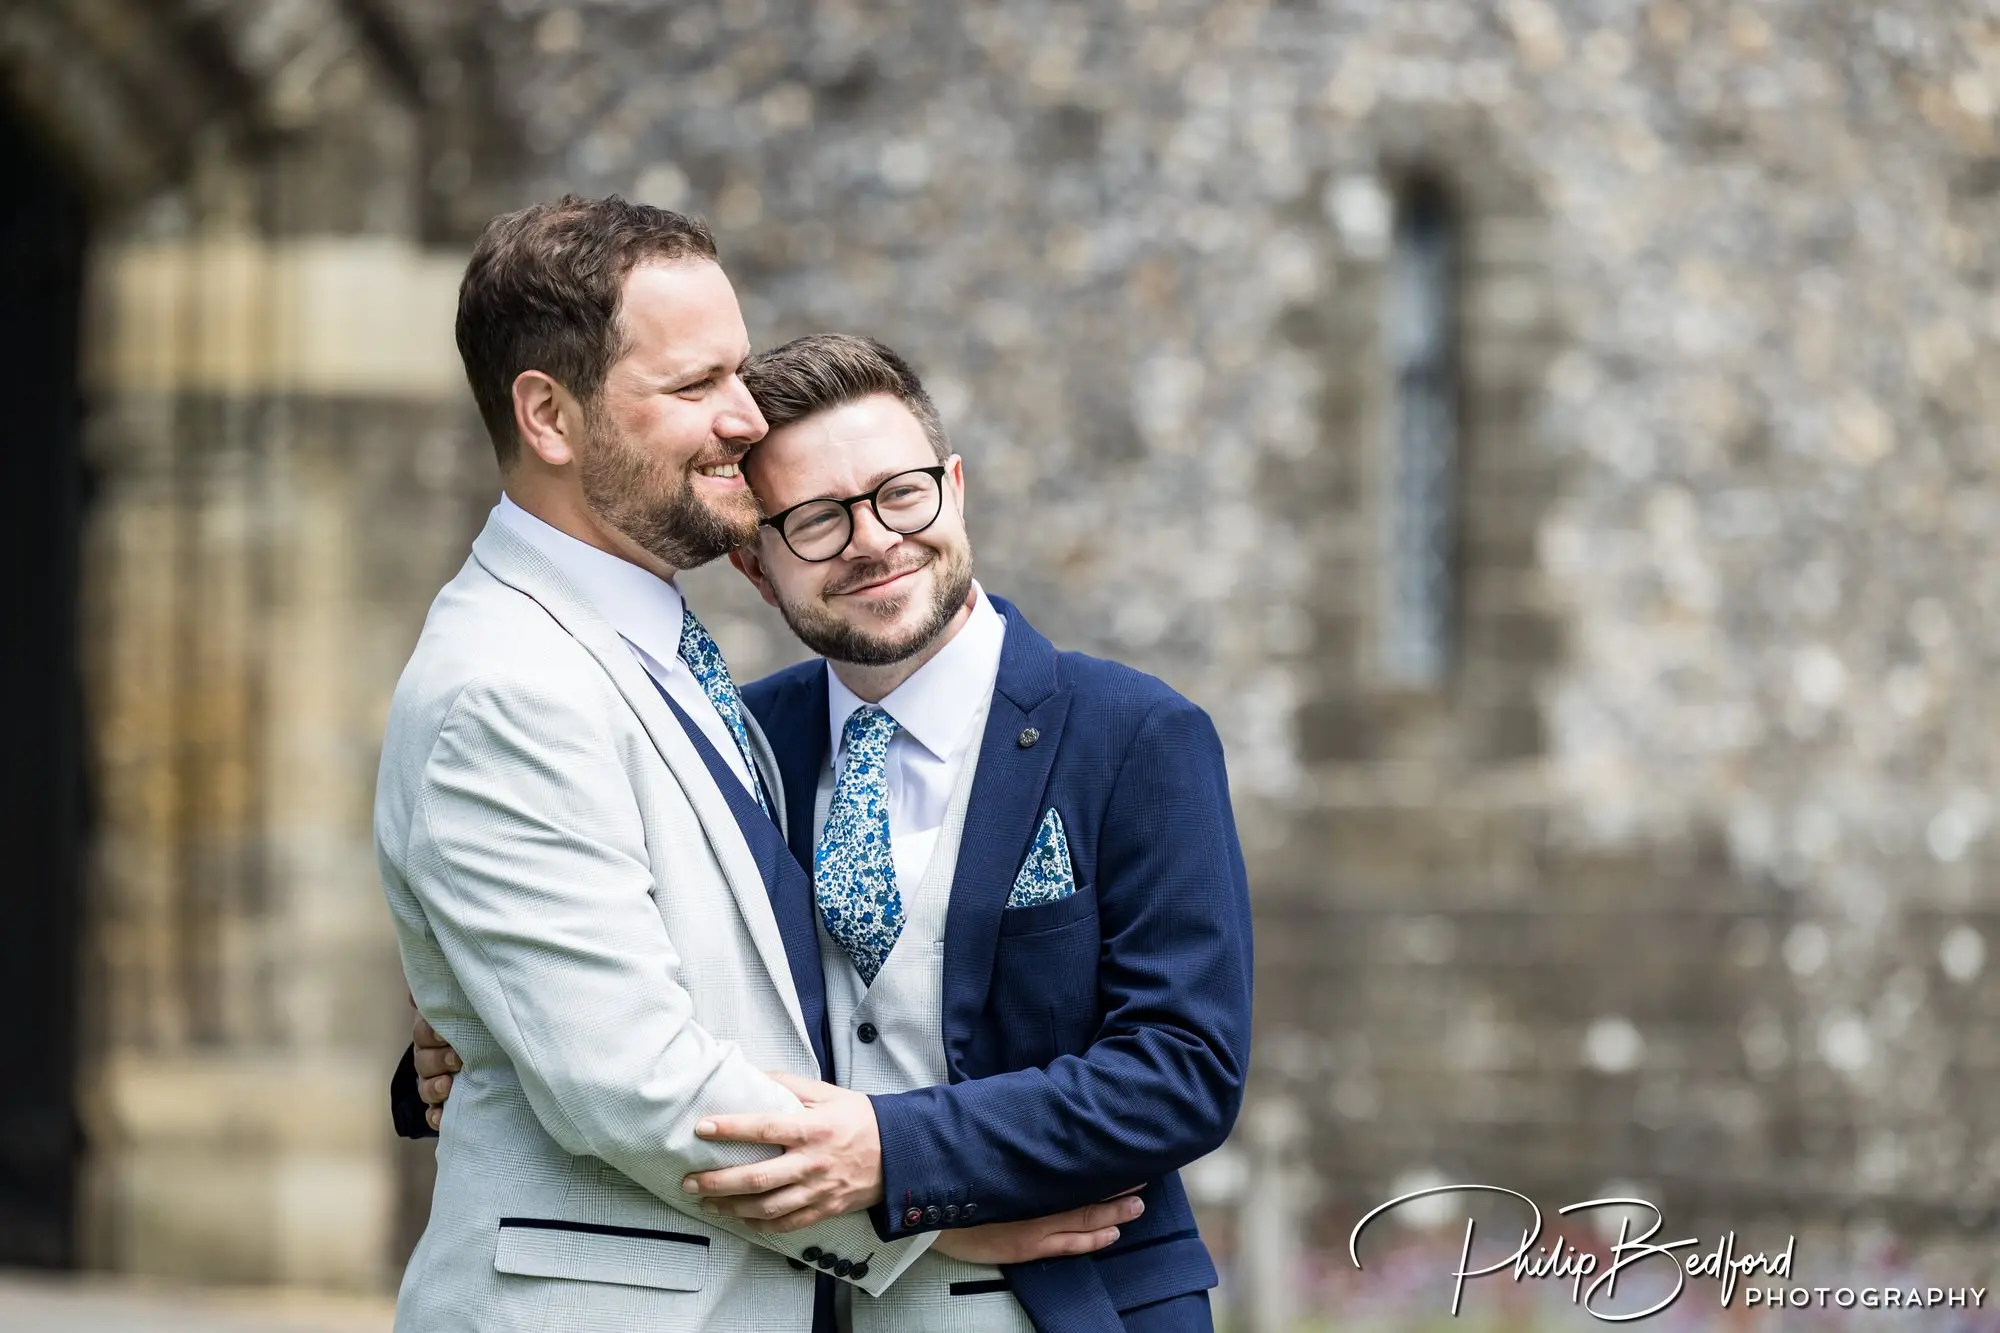 Two men on their wedding day embracing and looking happy with a backdrop of Arundel Castle